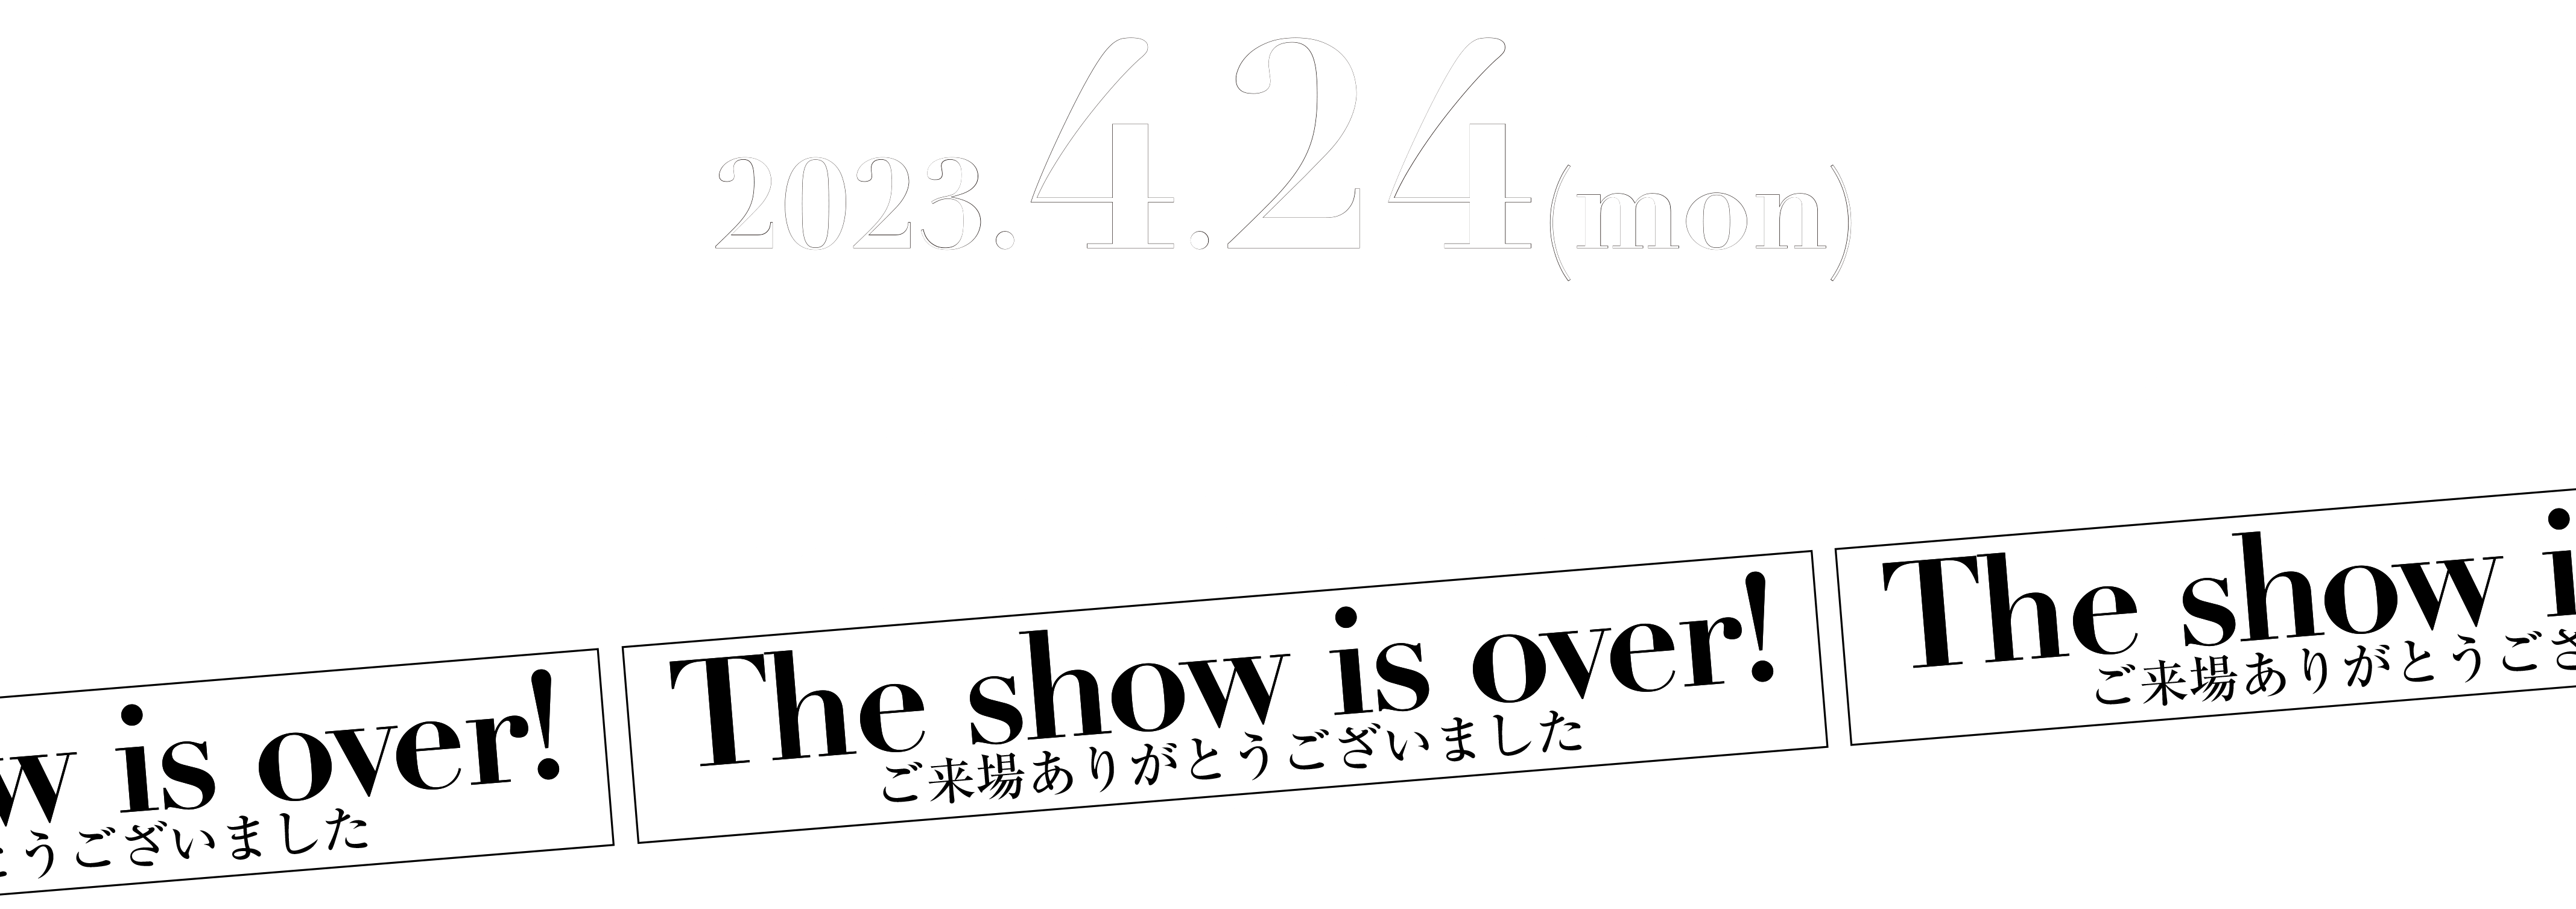 2023.4.24 the prince park tower tokyo